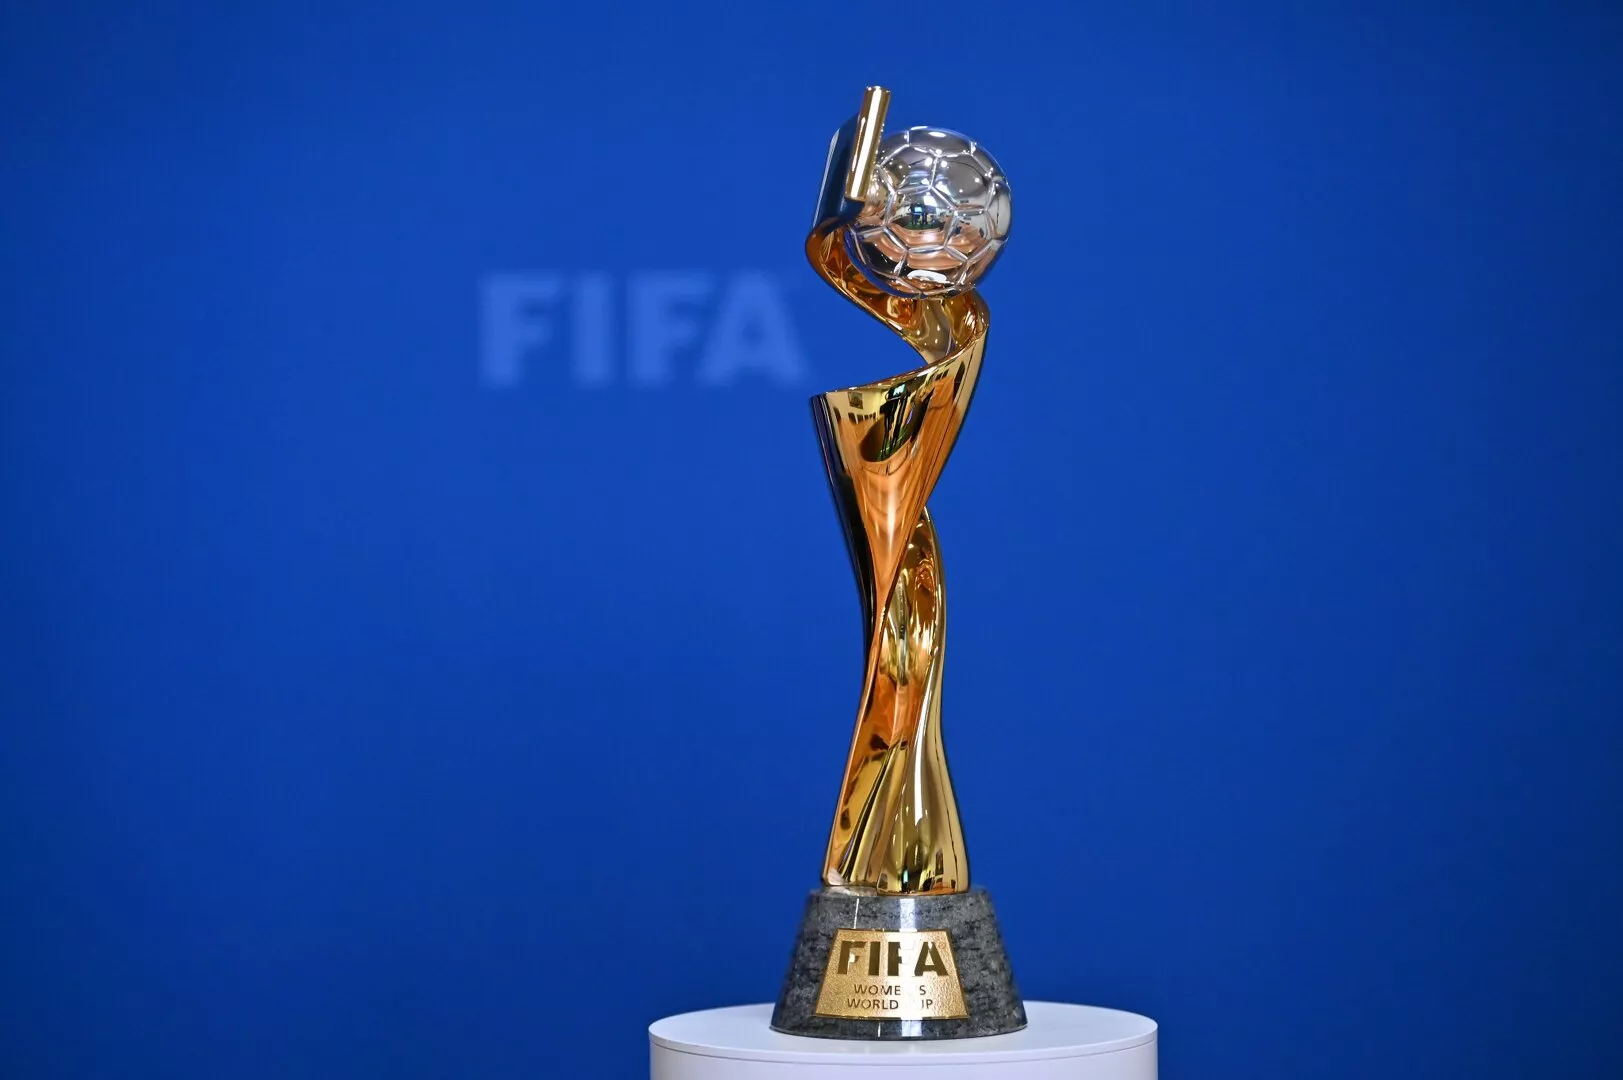 Who Will Win the 2023 Women's World Cup Golden Boot?